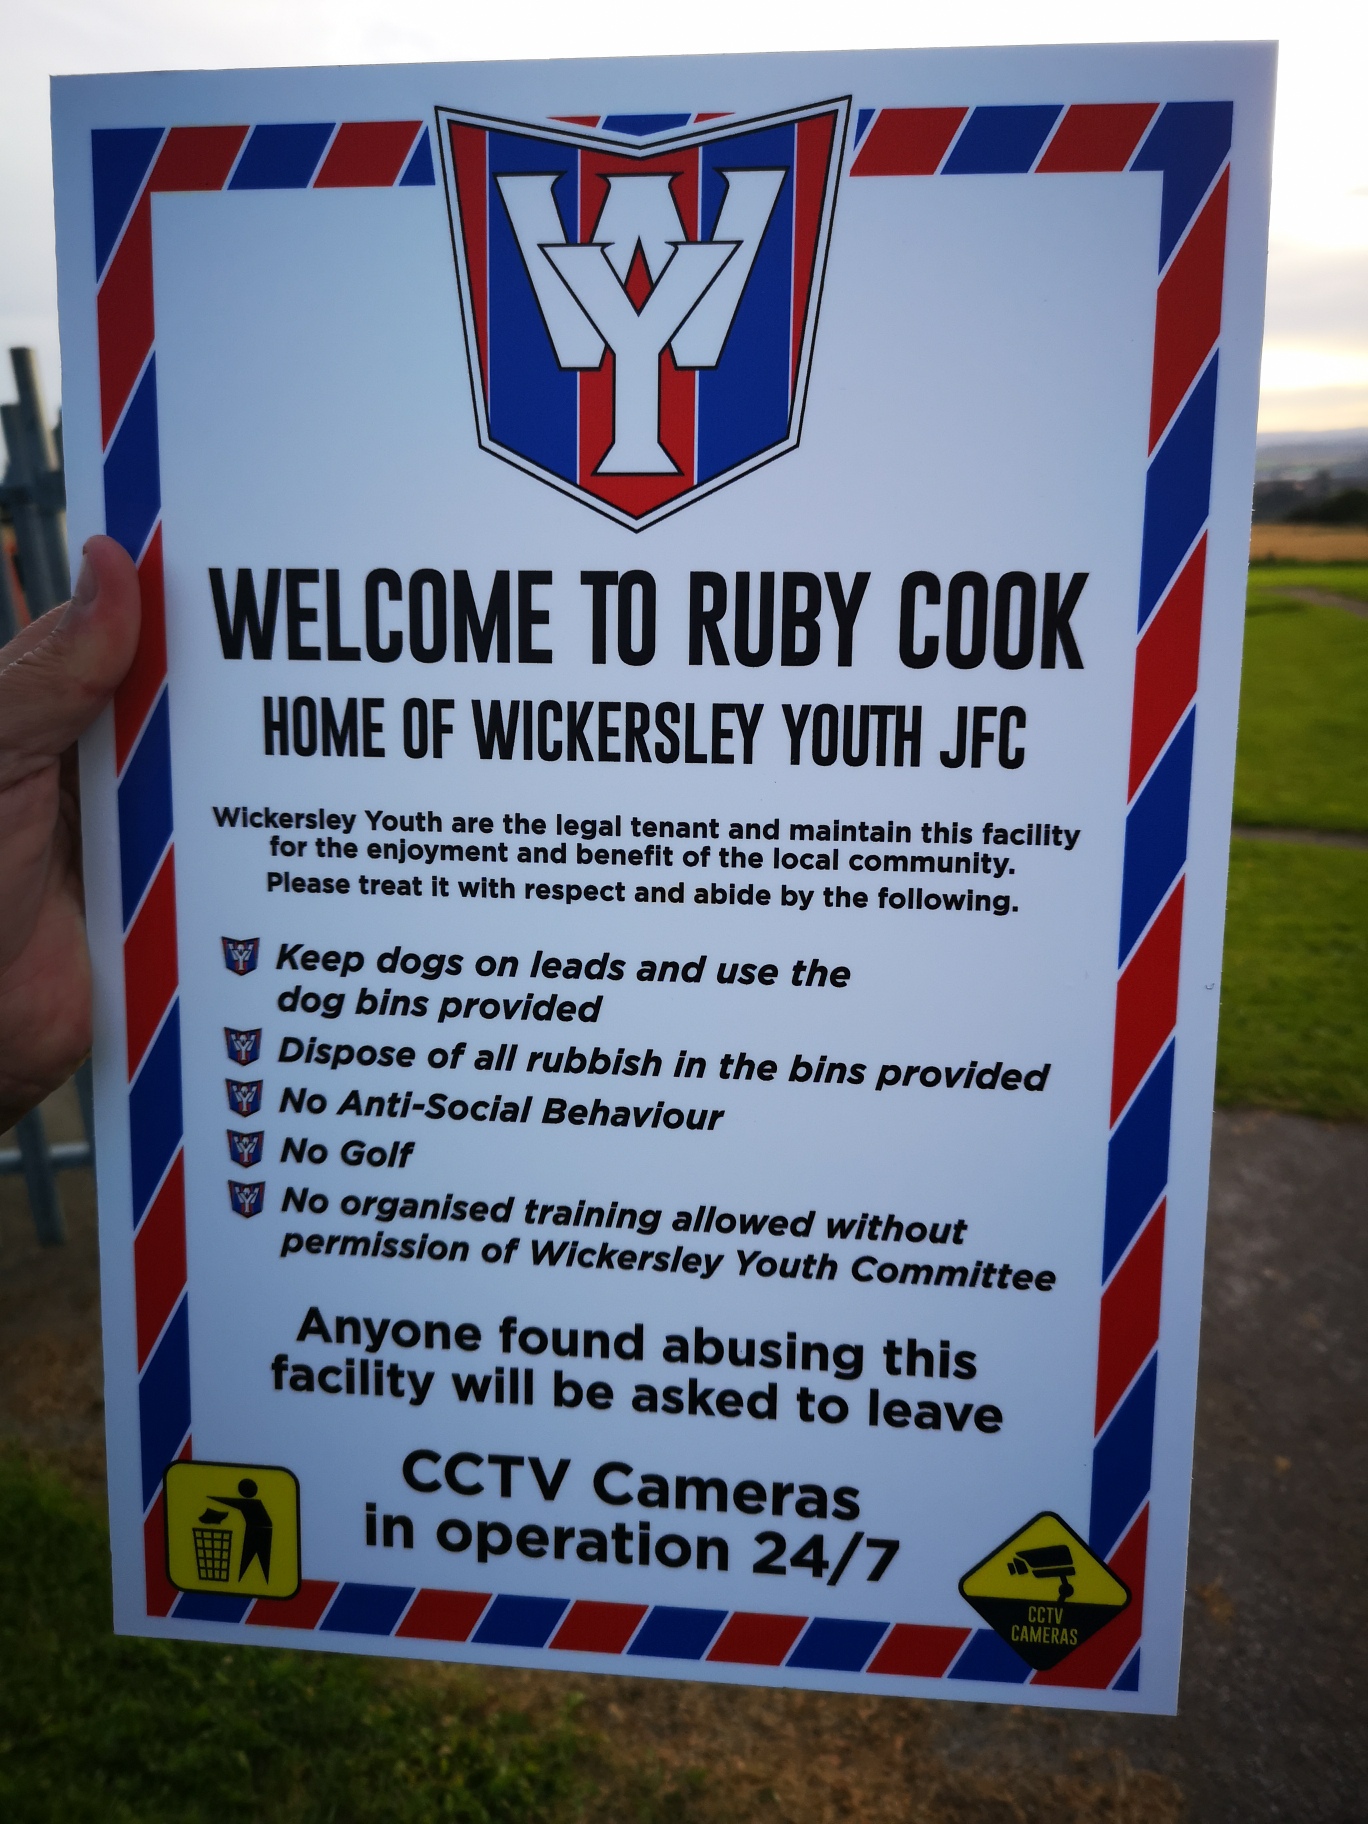 CLUB ANNOUNCEMENT: Wickersley Youth Junior Football Club has secured Ruby Cook Playing Fields Lease